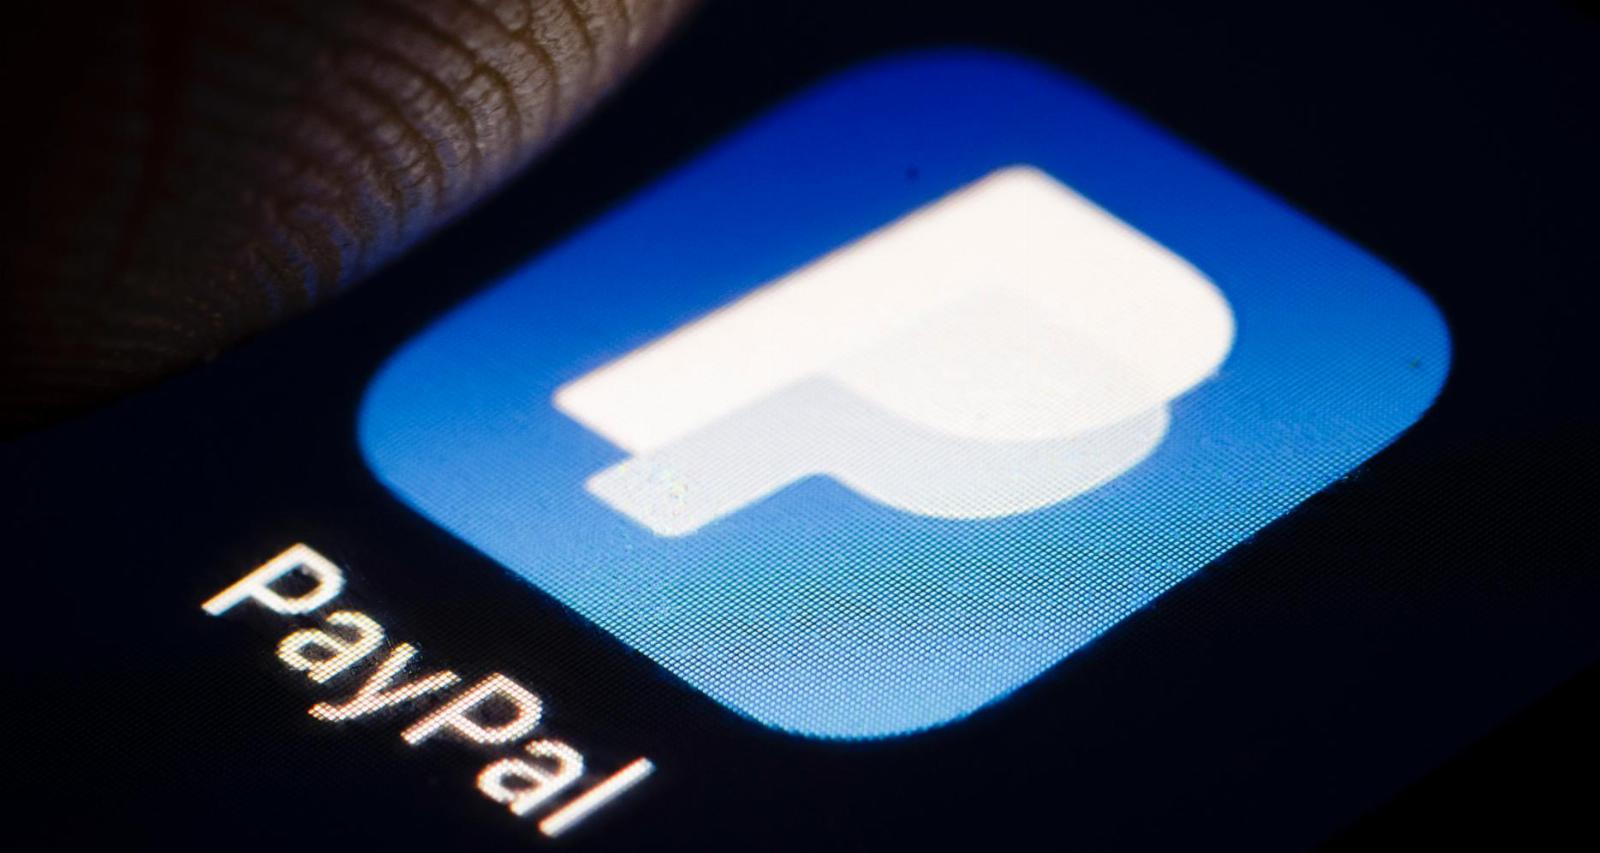 PayPal’s app can now track your packages, even if you didn’t checkout with its service